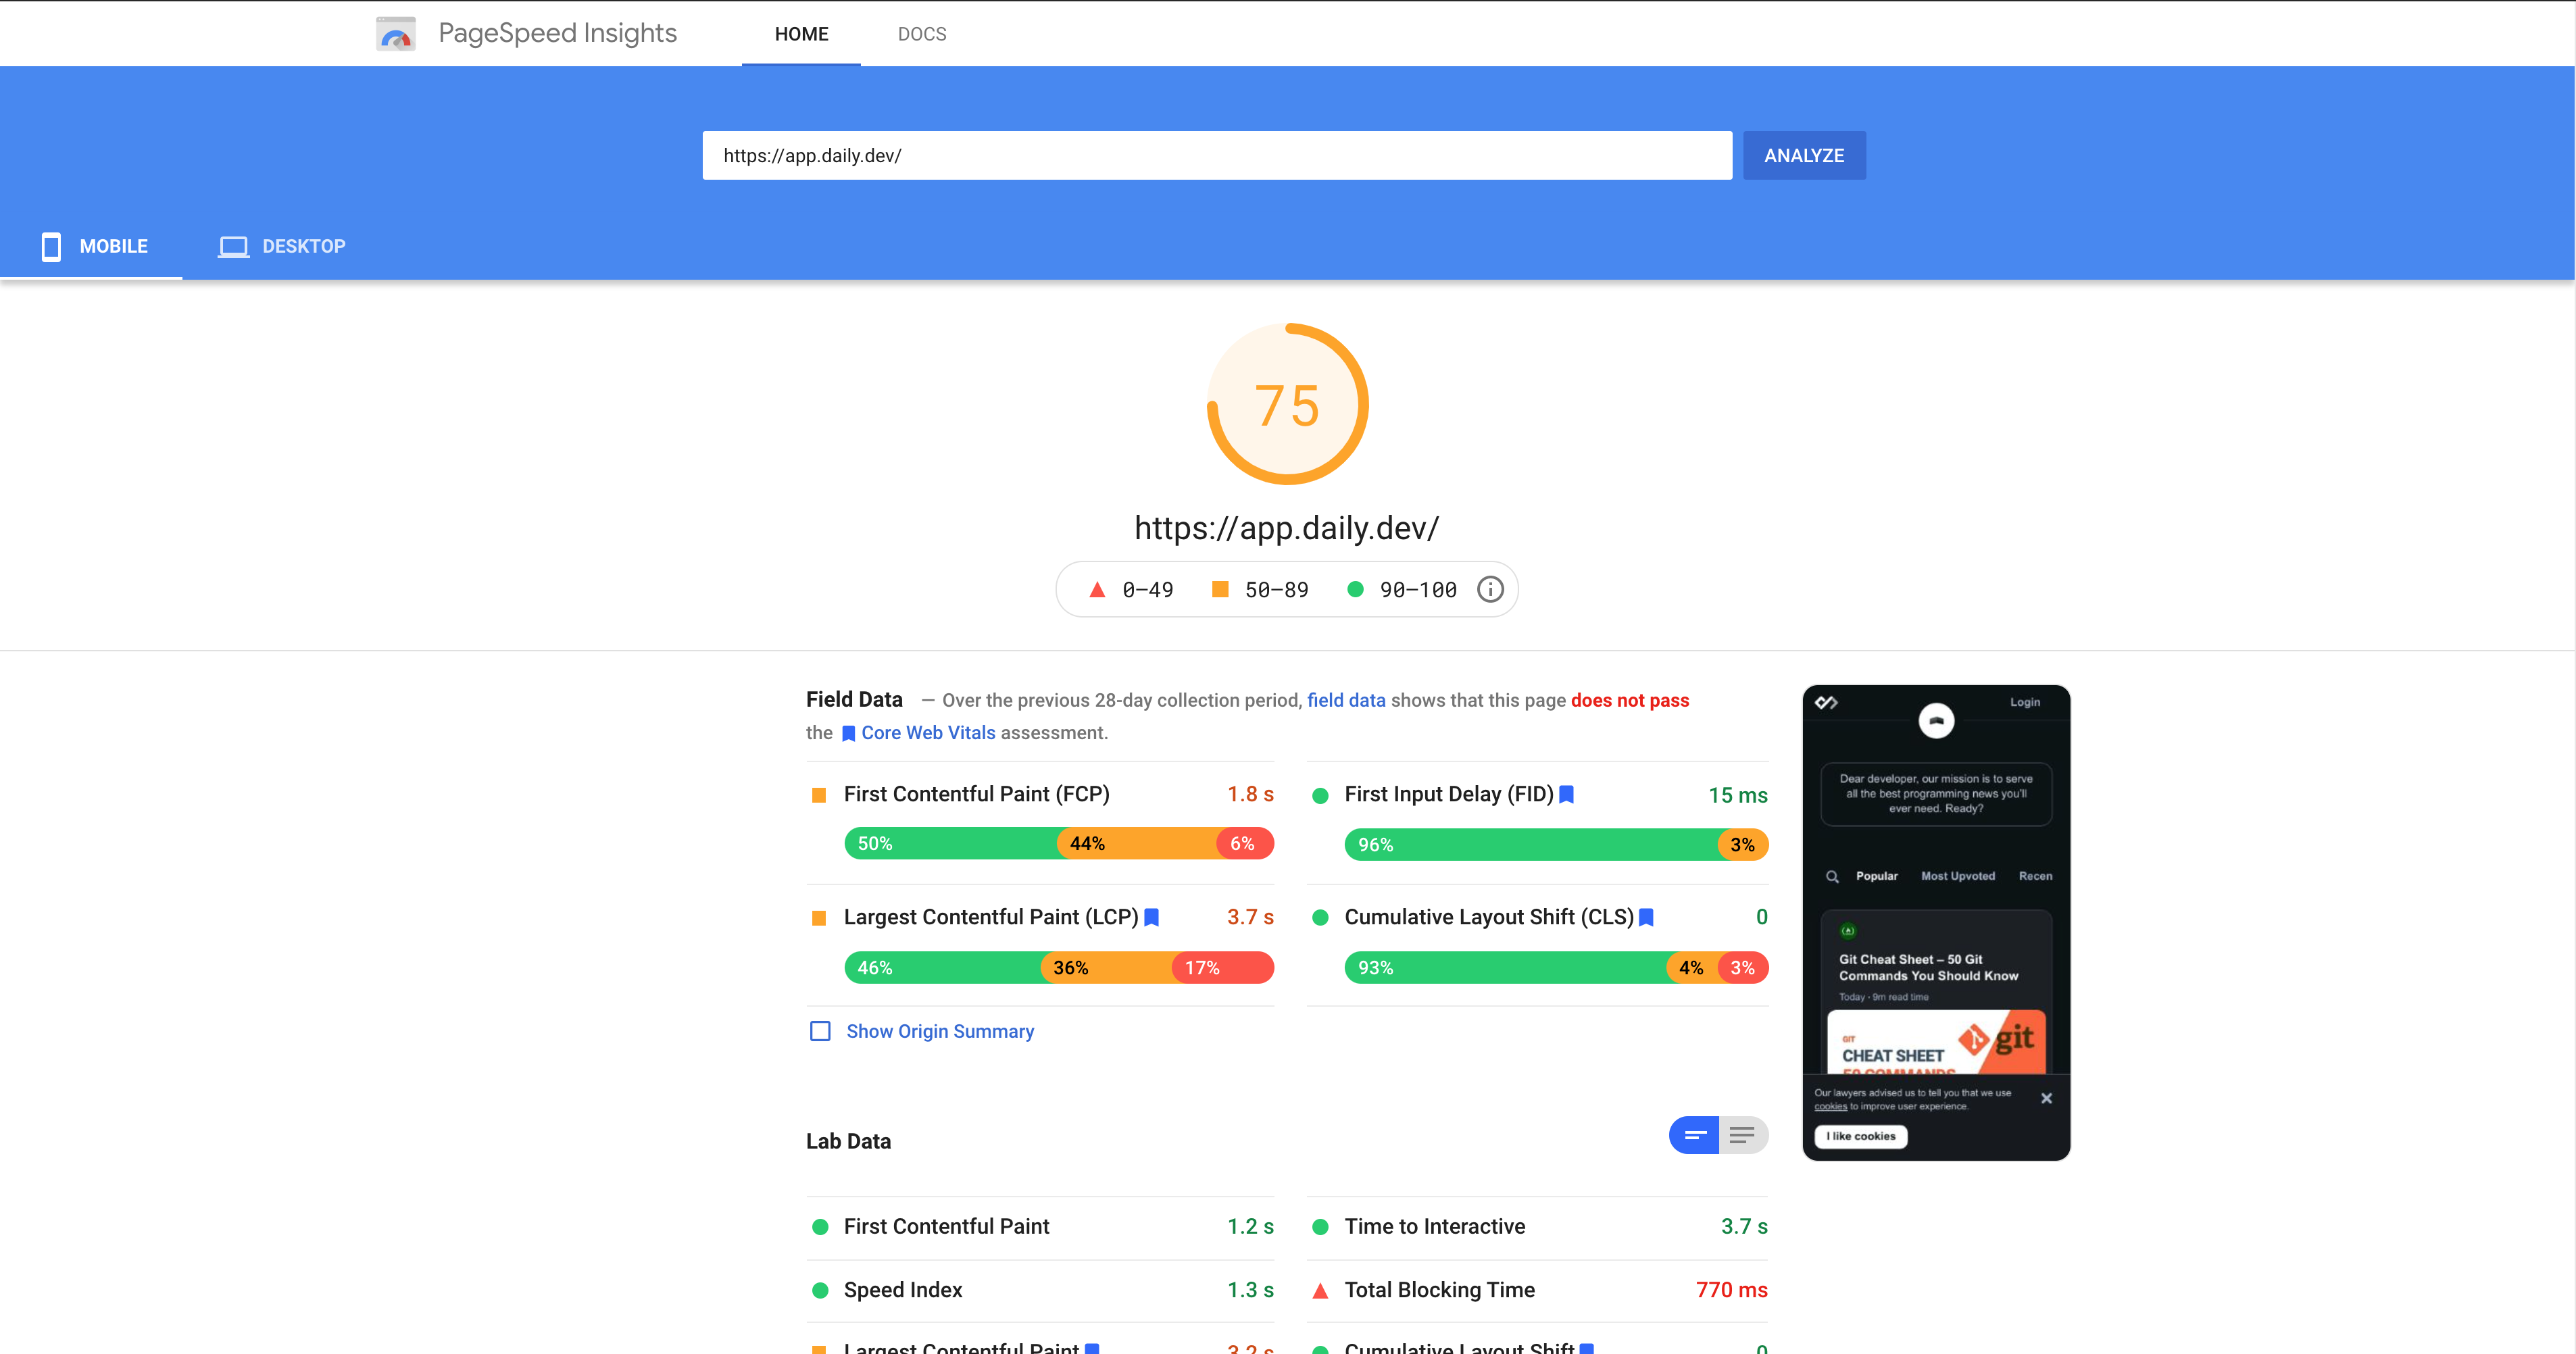 PageSpeed report - score 75 out of 100